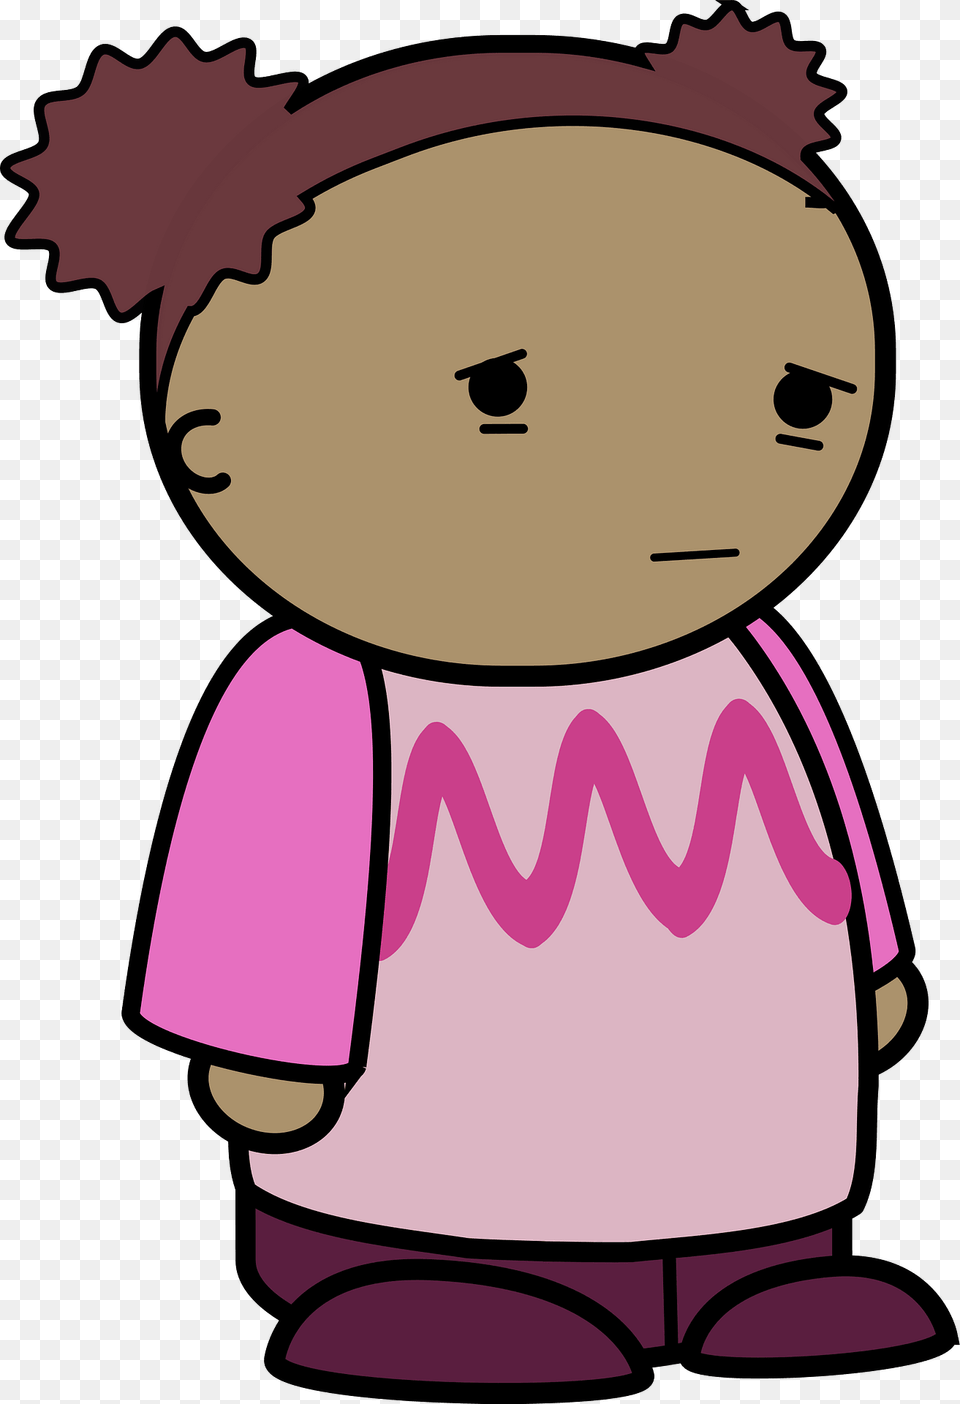 Curly Haired Girl In A Pink Shirt Sad Face To The Side Clipart, Toy, Doll, Smoke Pipe Png